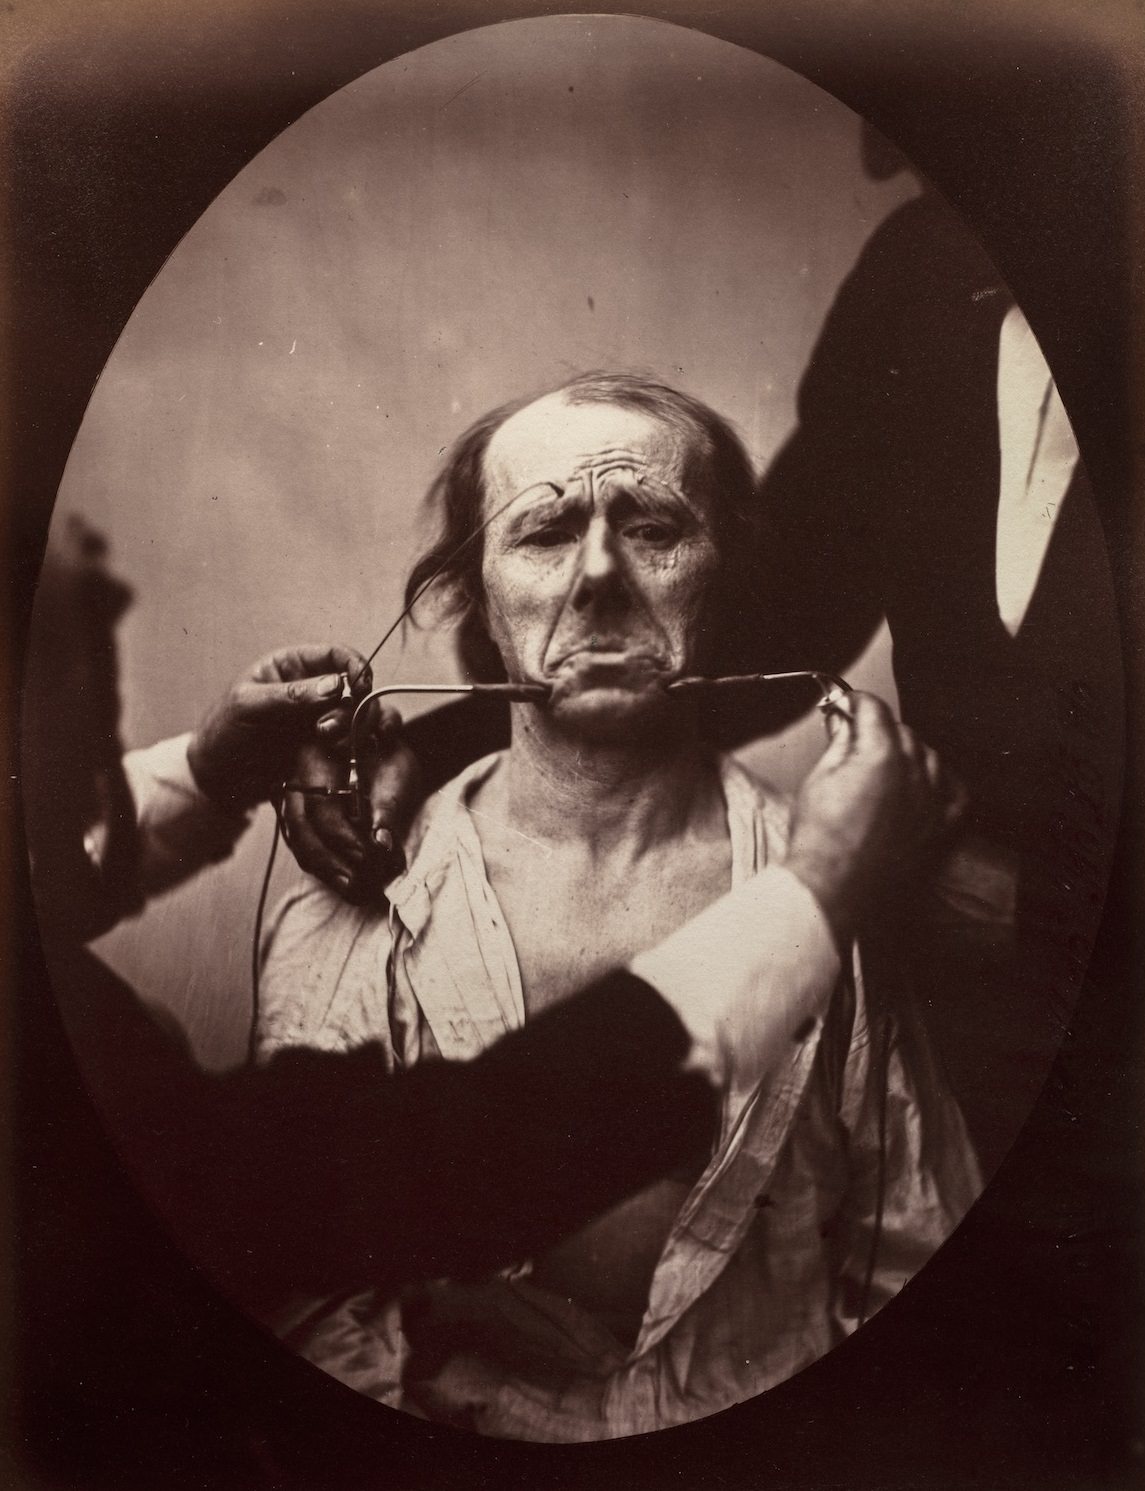 Stunning Illustrations from the Mechanism of Human Physiognomy by Guillaume-Benjamin-Amand Duchenne de Boulogne